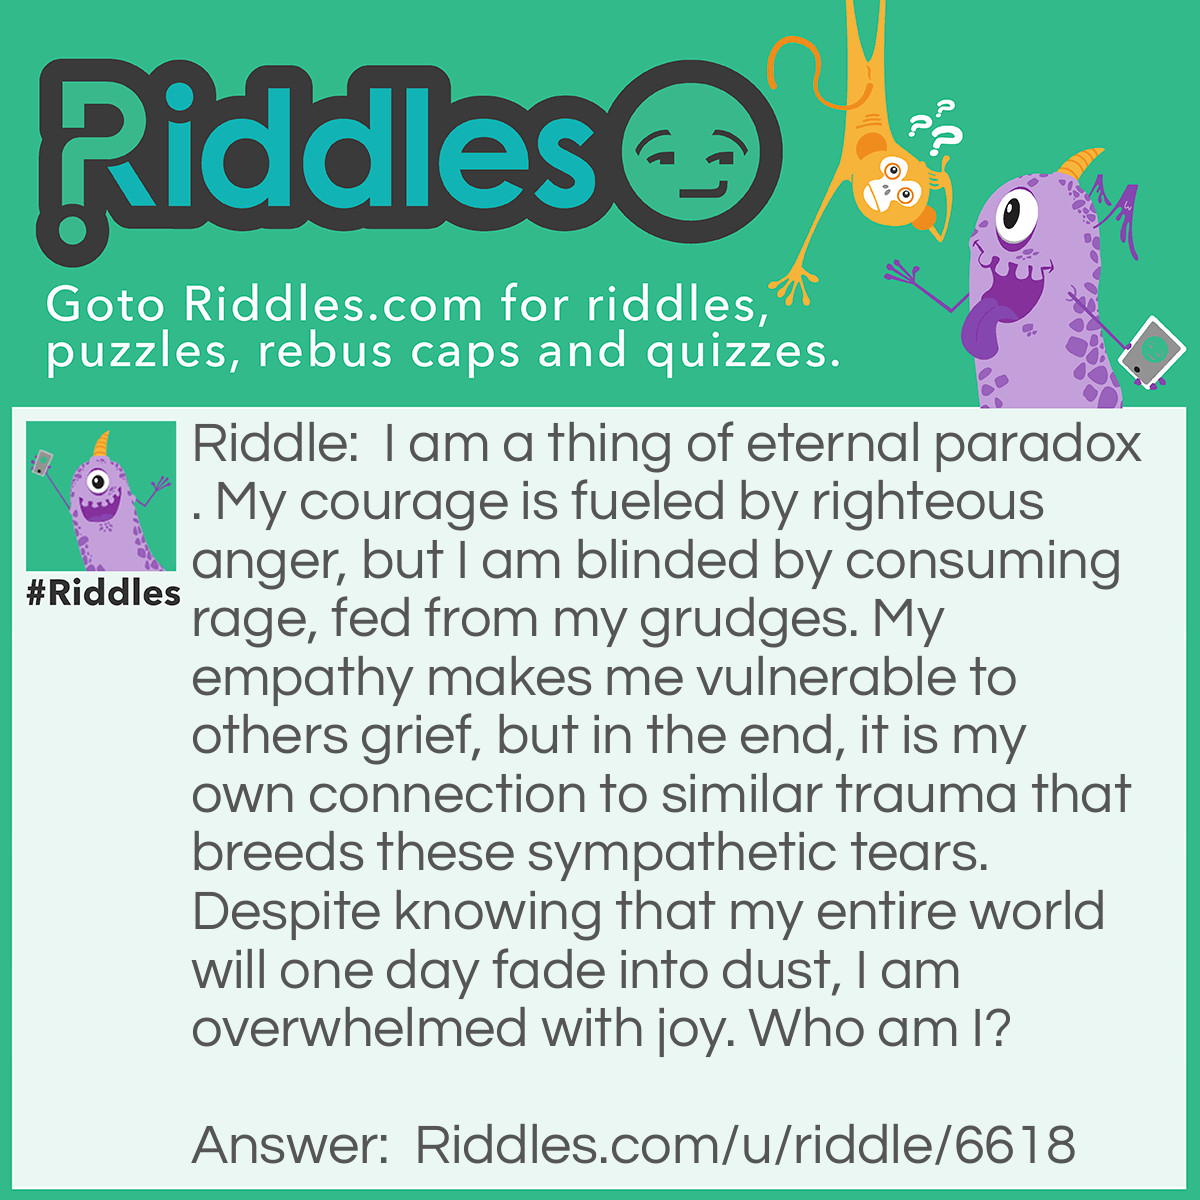 Riddle: I am a thing of eternal paradox. My courage is fueled by righteous anger, but I am blinded by consuming rage, fed from my grudges. My empathy makes me vulnerable to others grief, but in the end, it is my own connection to similar trauma that breeds these sympathetic tears. Despite knowing that my entire world will one day fade into dust, I am overwhelmed with joy. Who am I? Answer: I don't the answer, really! Please comment if you know it!